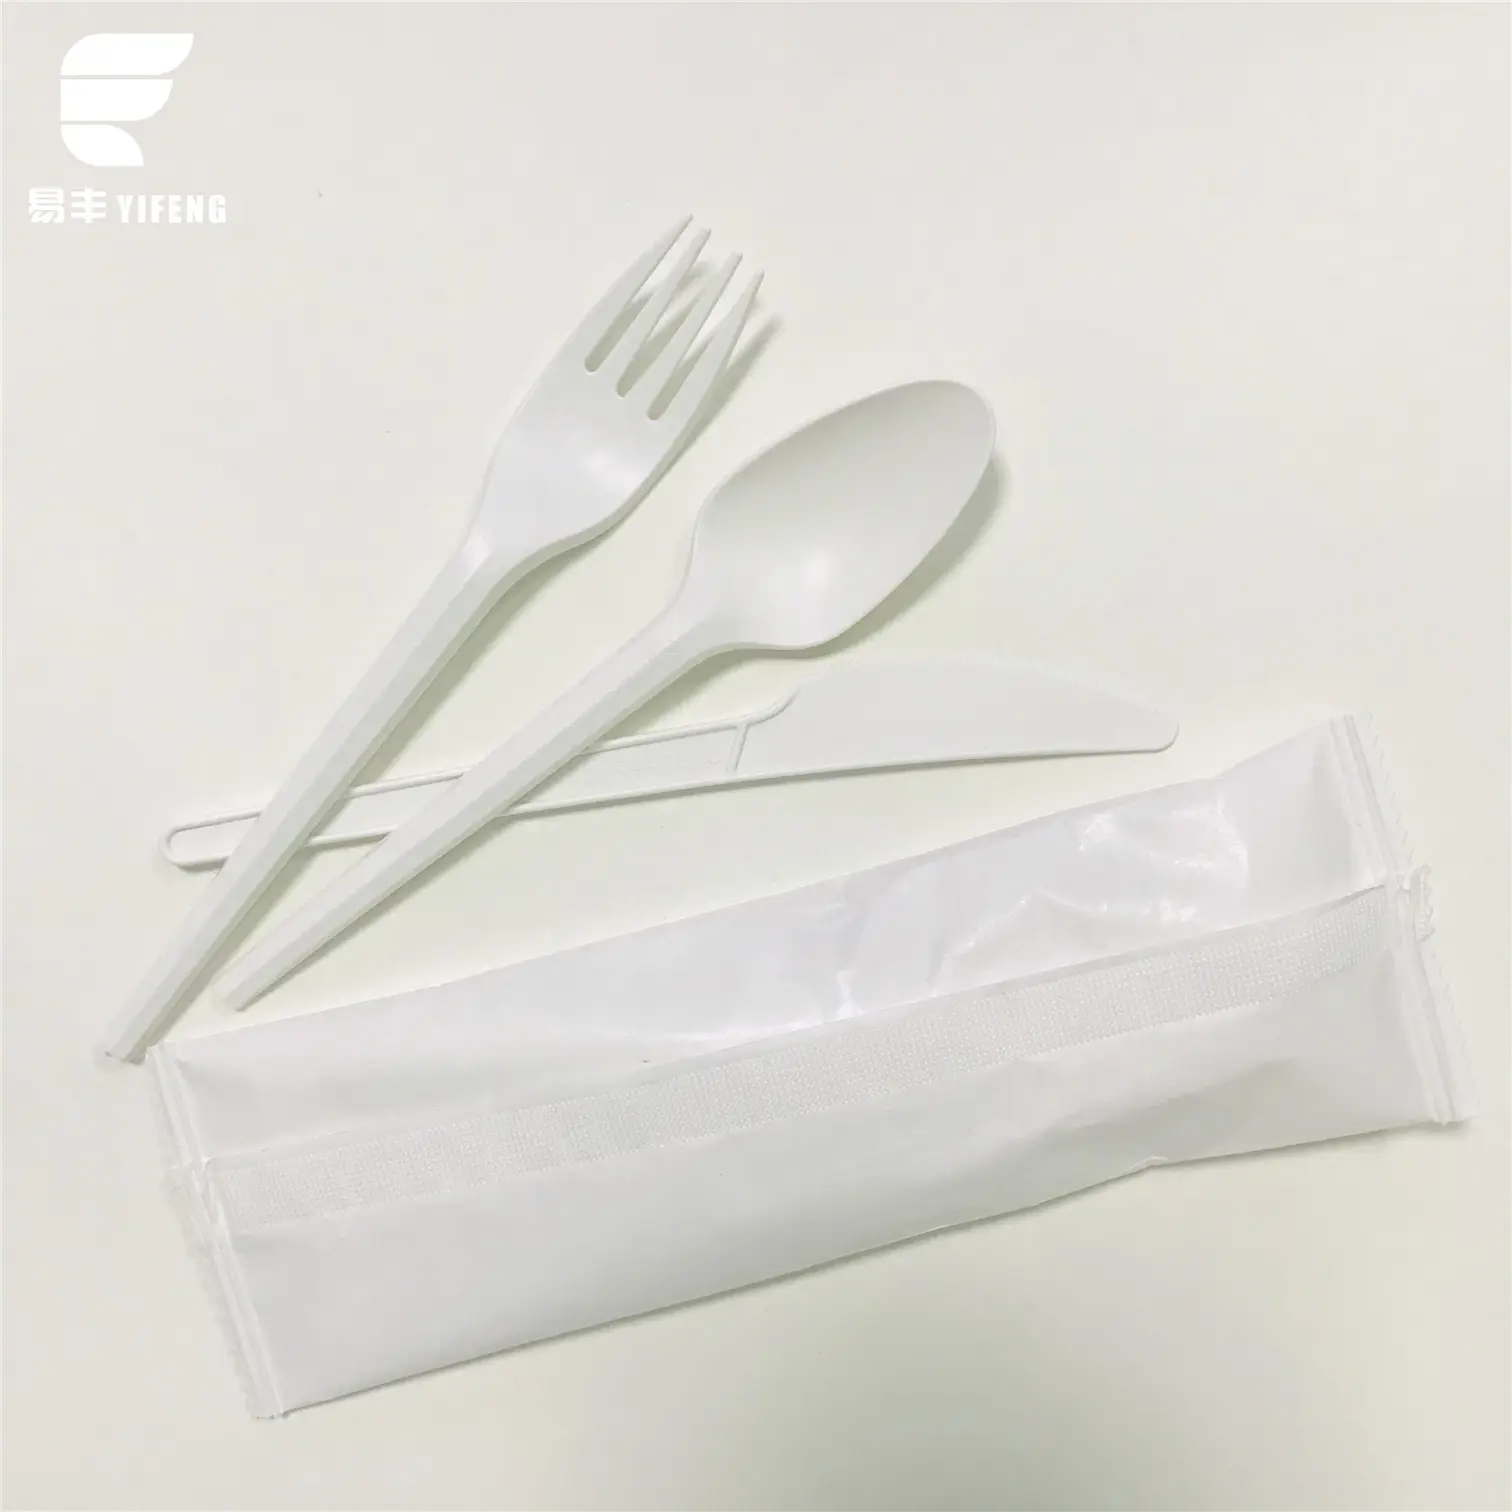 Biodegradable compostable PLA cutlery napkin meal kit for school